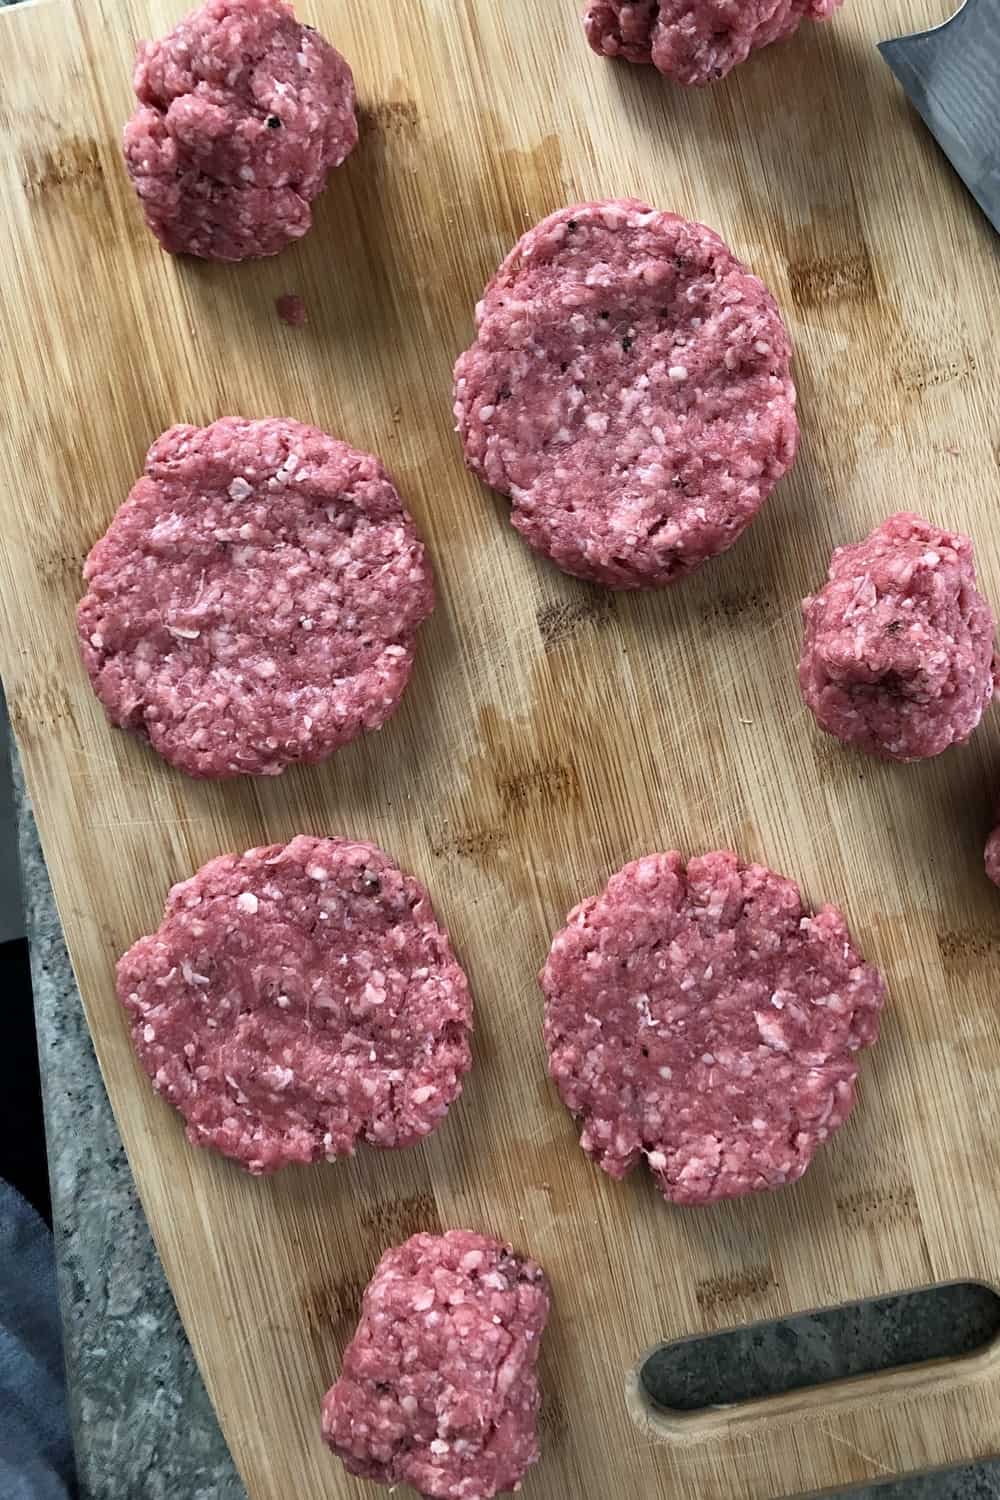 uncooked burgers on a cutting board 